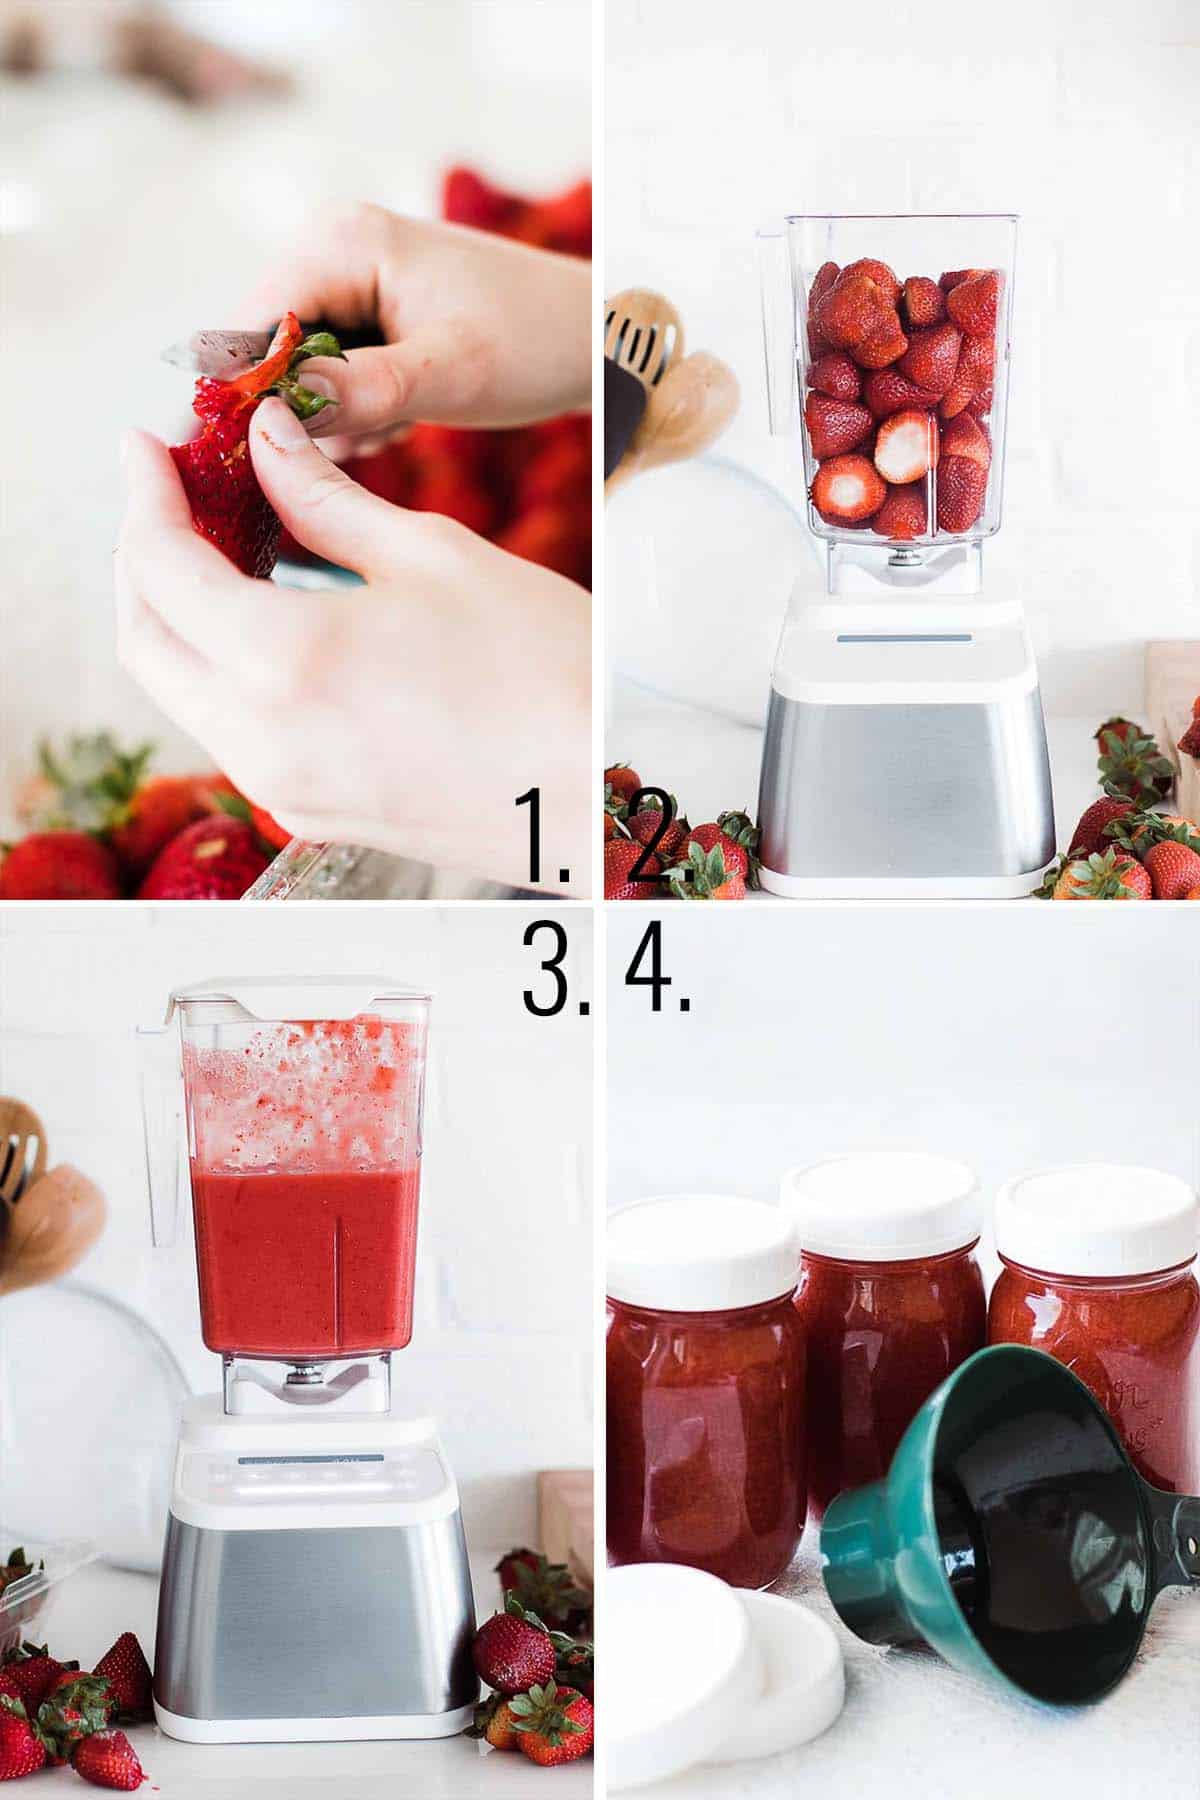 A collage of images showing the steps to make the best no-cook strawberry jam. 